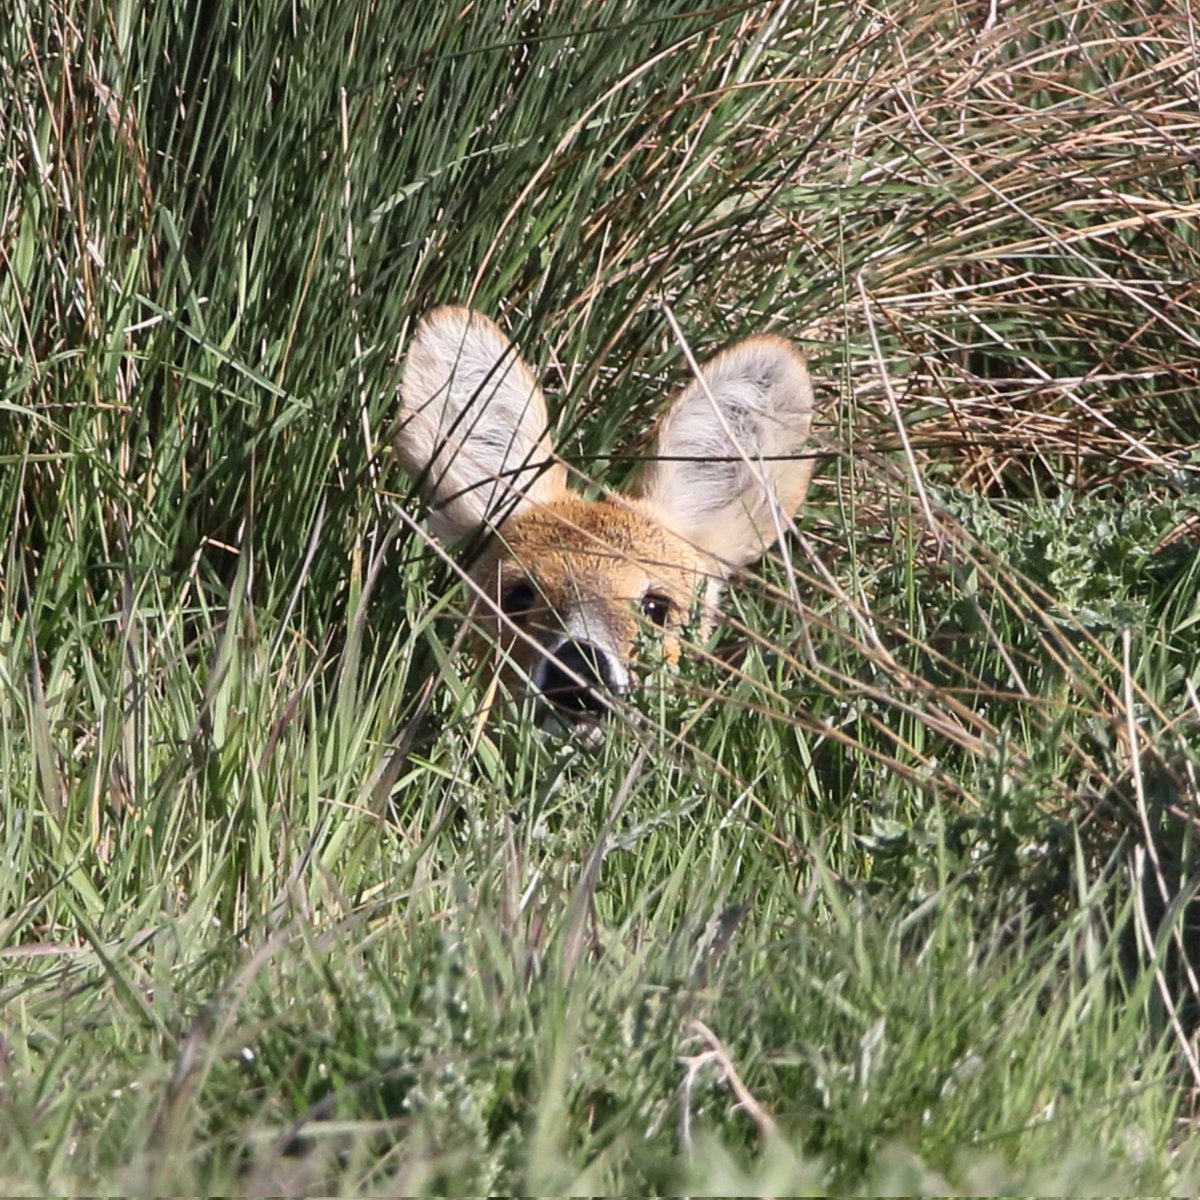 Chinese water deer trying to hide in the reeds of Cuckoo Fen, #RSPB Ouse Fen, Over, #Cambridgeshire The Teddy bear like ears are a giveaway @Natures_Voice @BritishDeerSoc @BBCSpringwatch #BBCWildlifePOTD #TwitterNatureCommunity #TwitterNaturePhotography